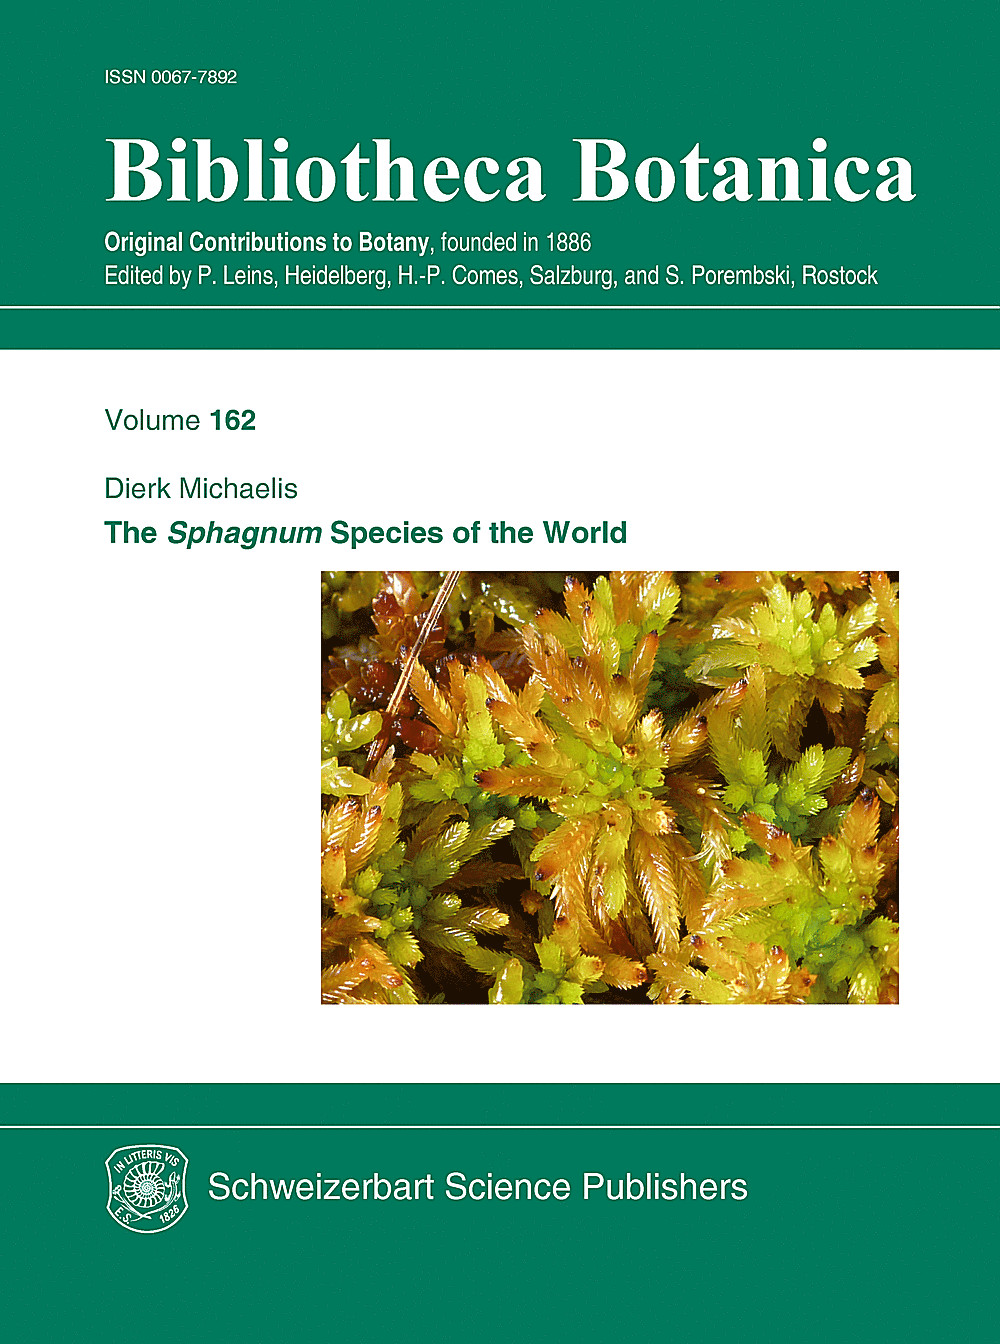 The Sphagnum species of the world圖片